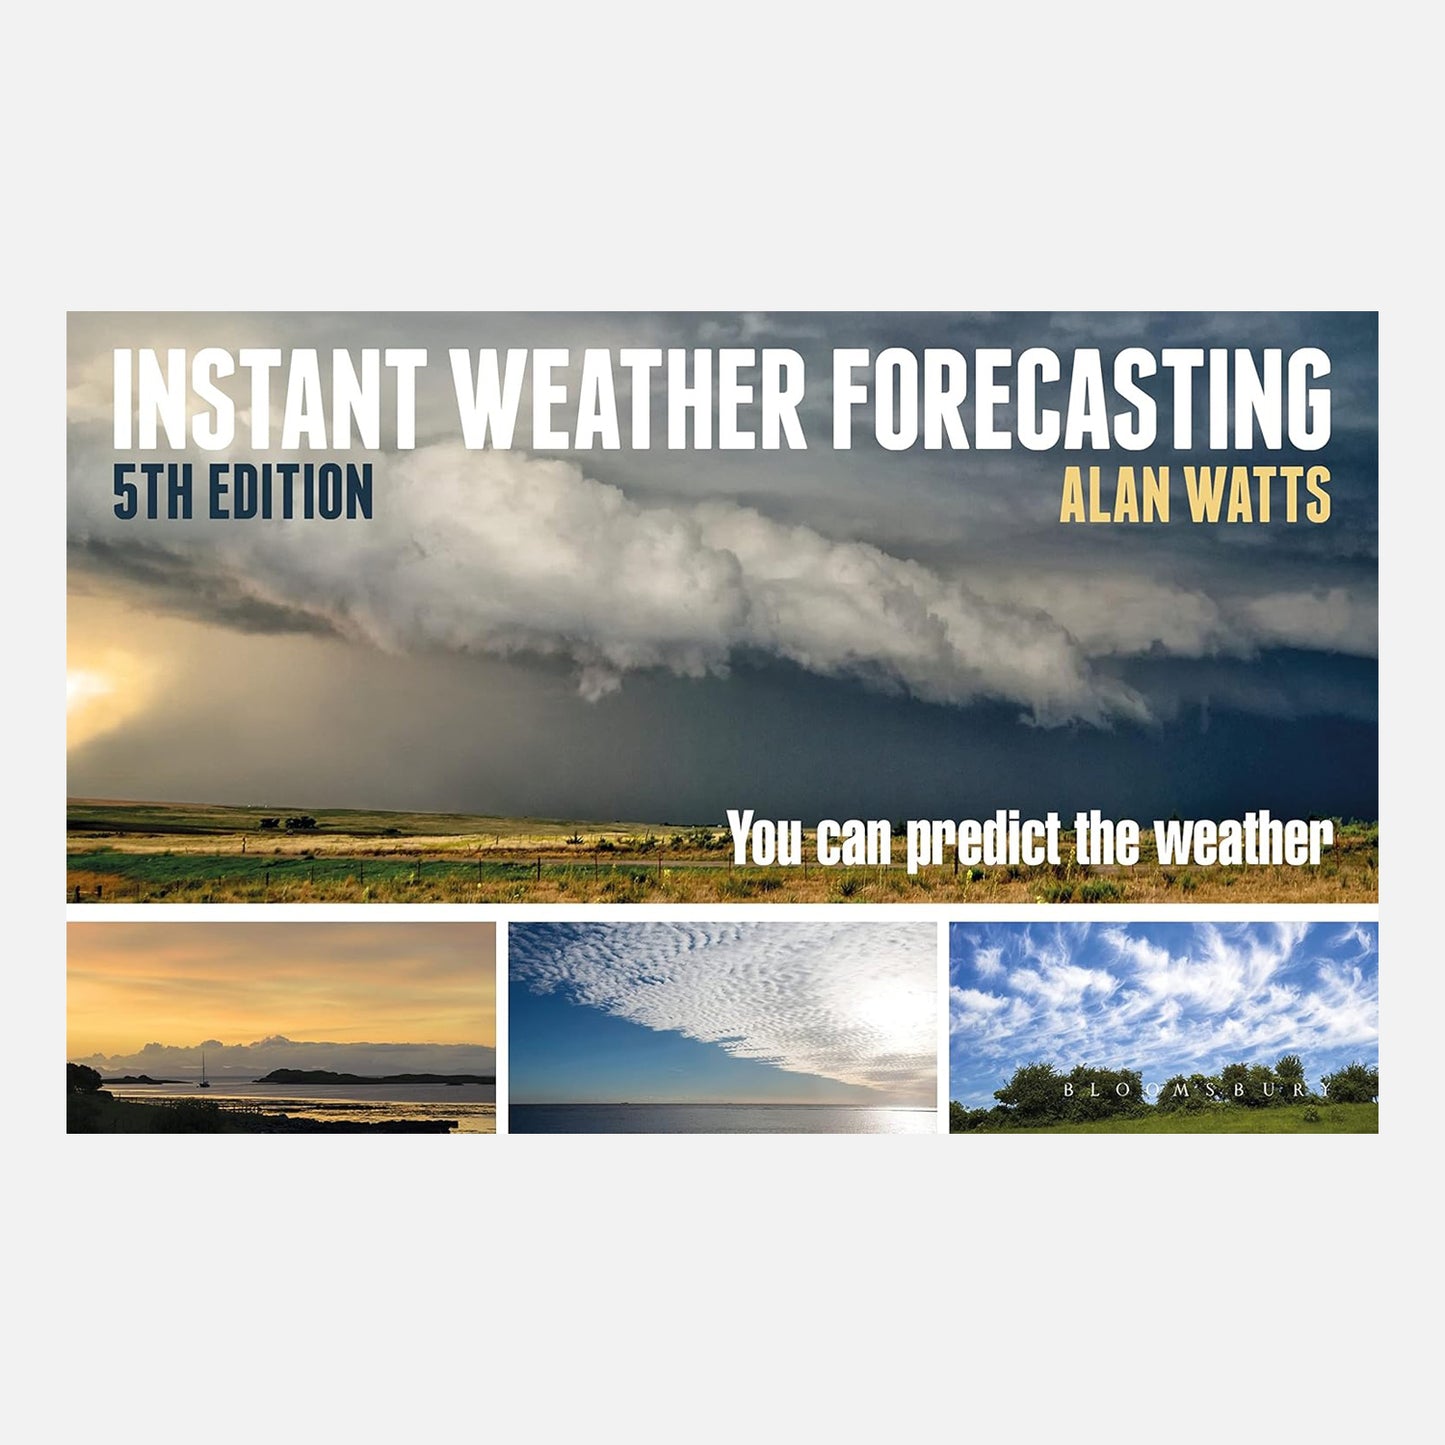 Instant Weather Forecasting: You Can Predict the Weather by Alan Watts. 5th Edition. Varying weather scenes depicted over beautiful landscapes.3